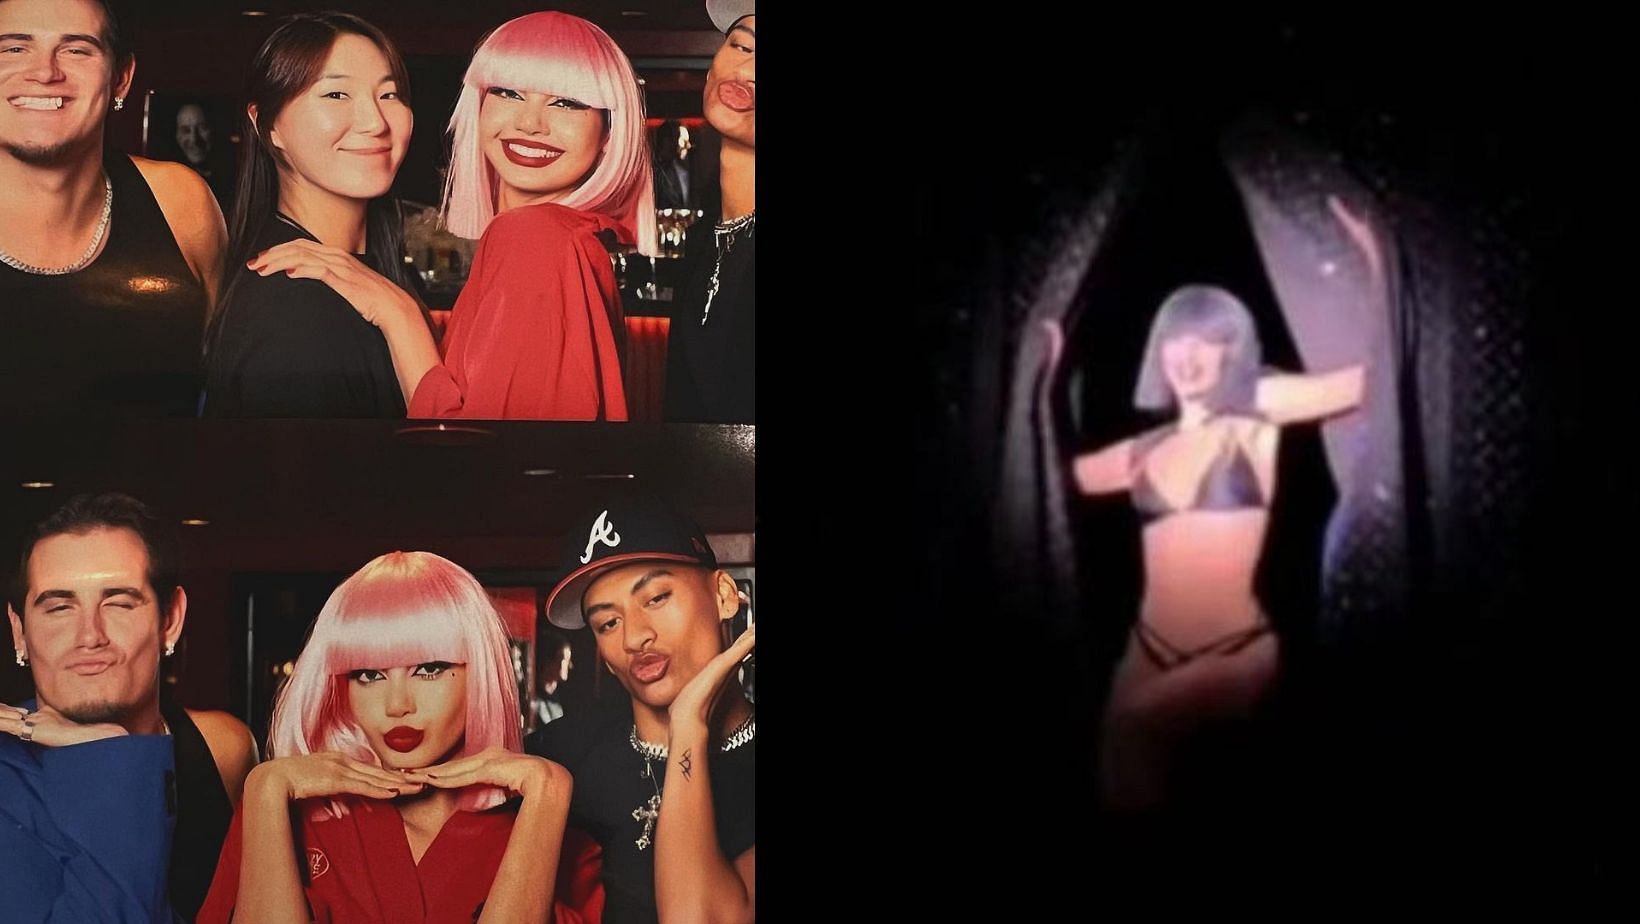 Lisa from BLACKPINK from her performance at the Crazy Horse Cabaret. (Images via Twitter/@thehighlight0 and @lisalebron29150)